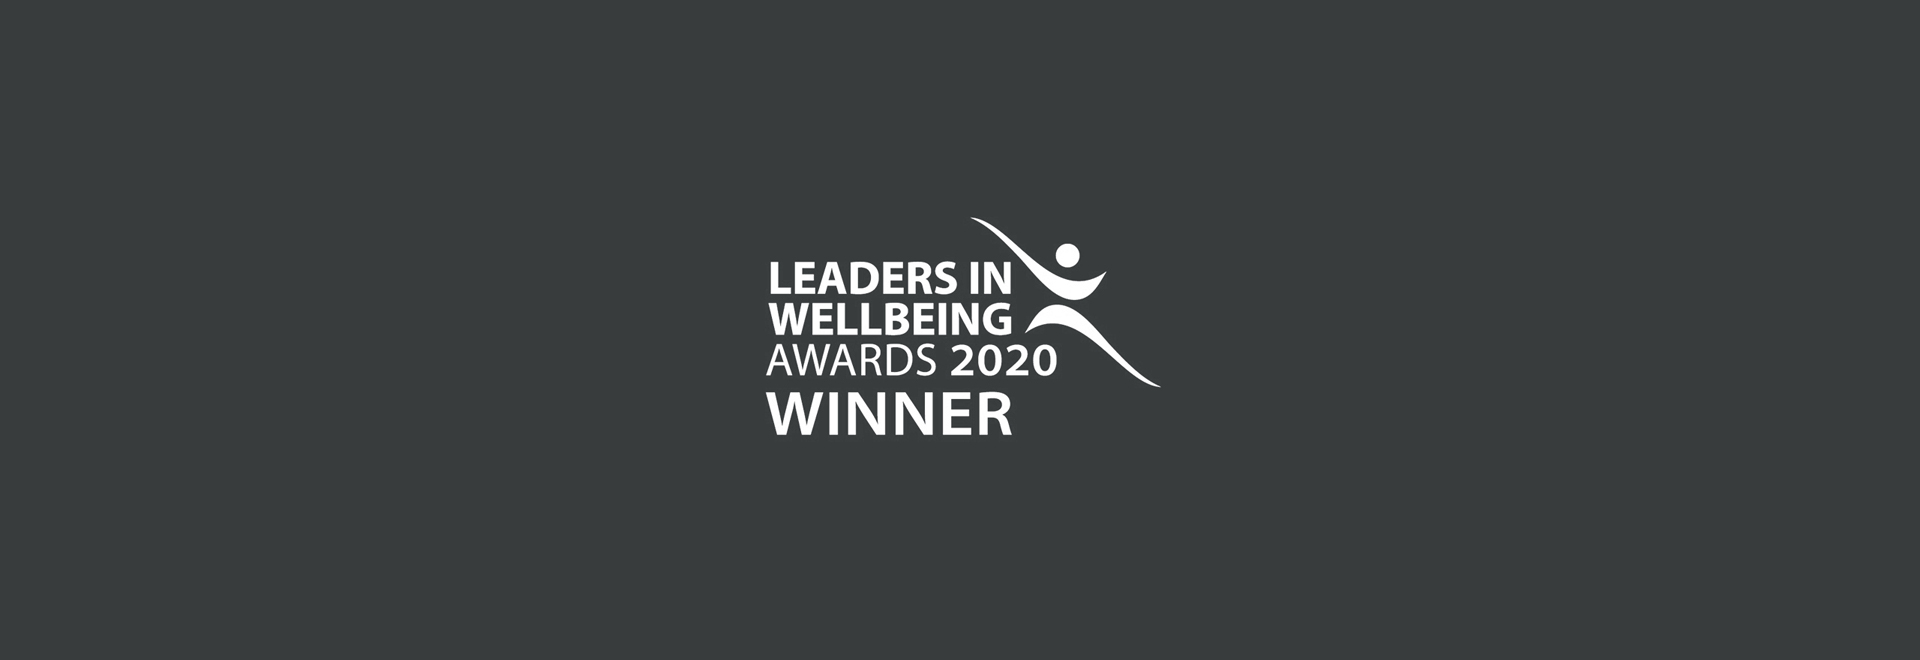 Accuro Trust Jersey winner of the Leaders in WellBeing Awards 2020 in the Mental Health category